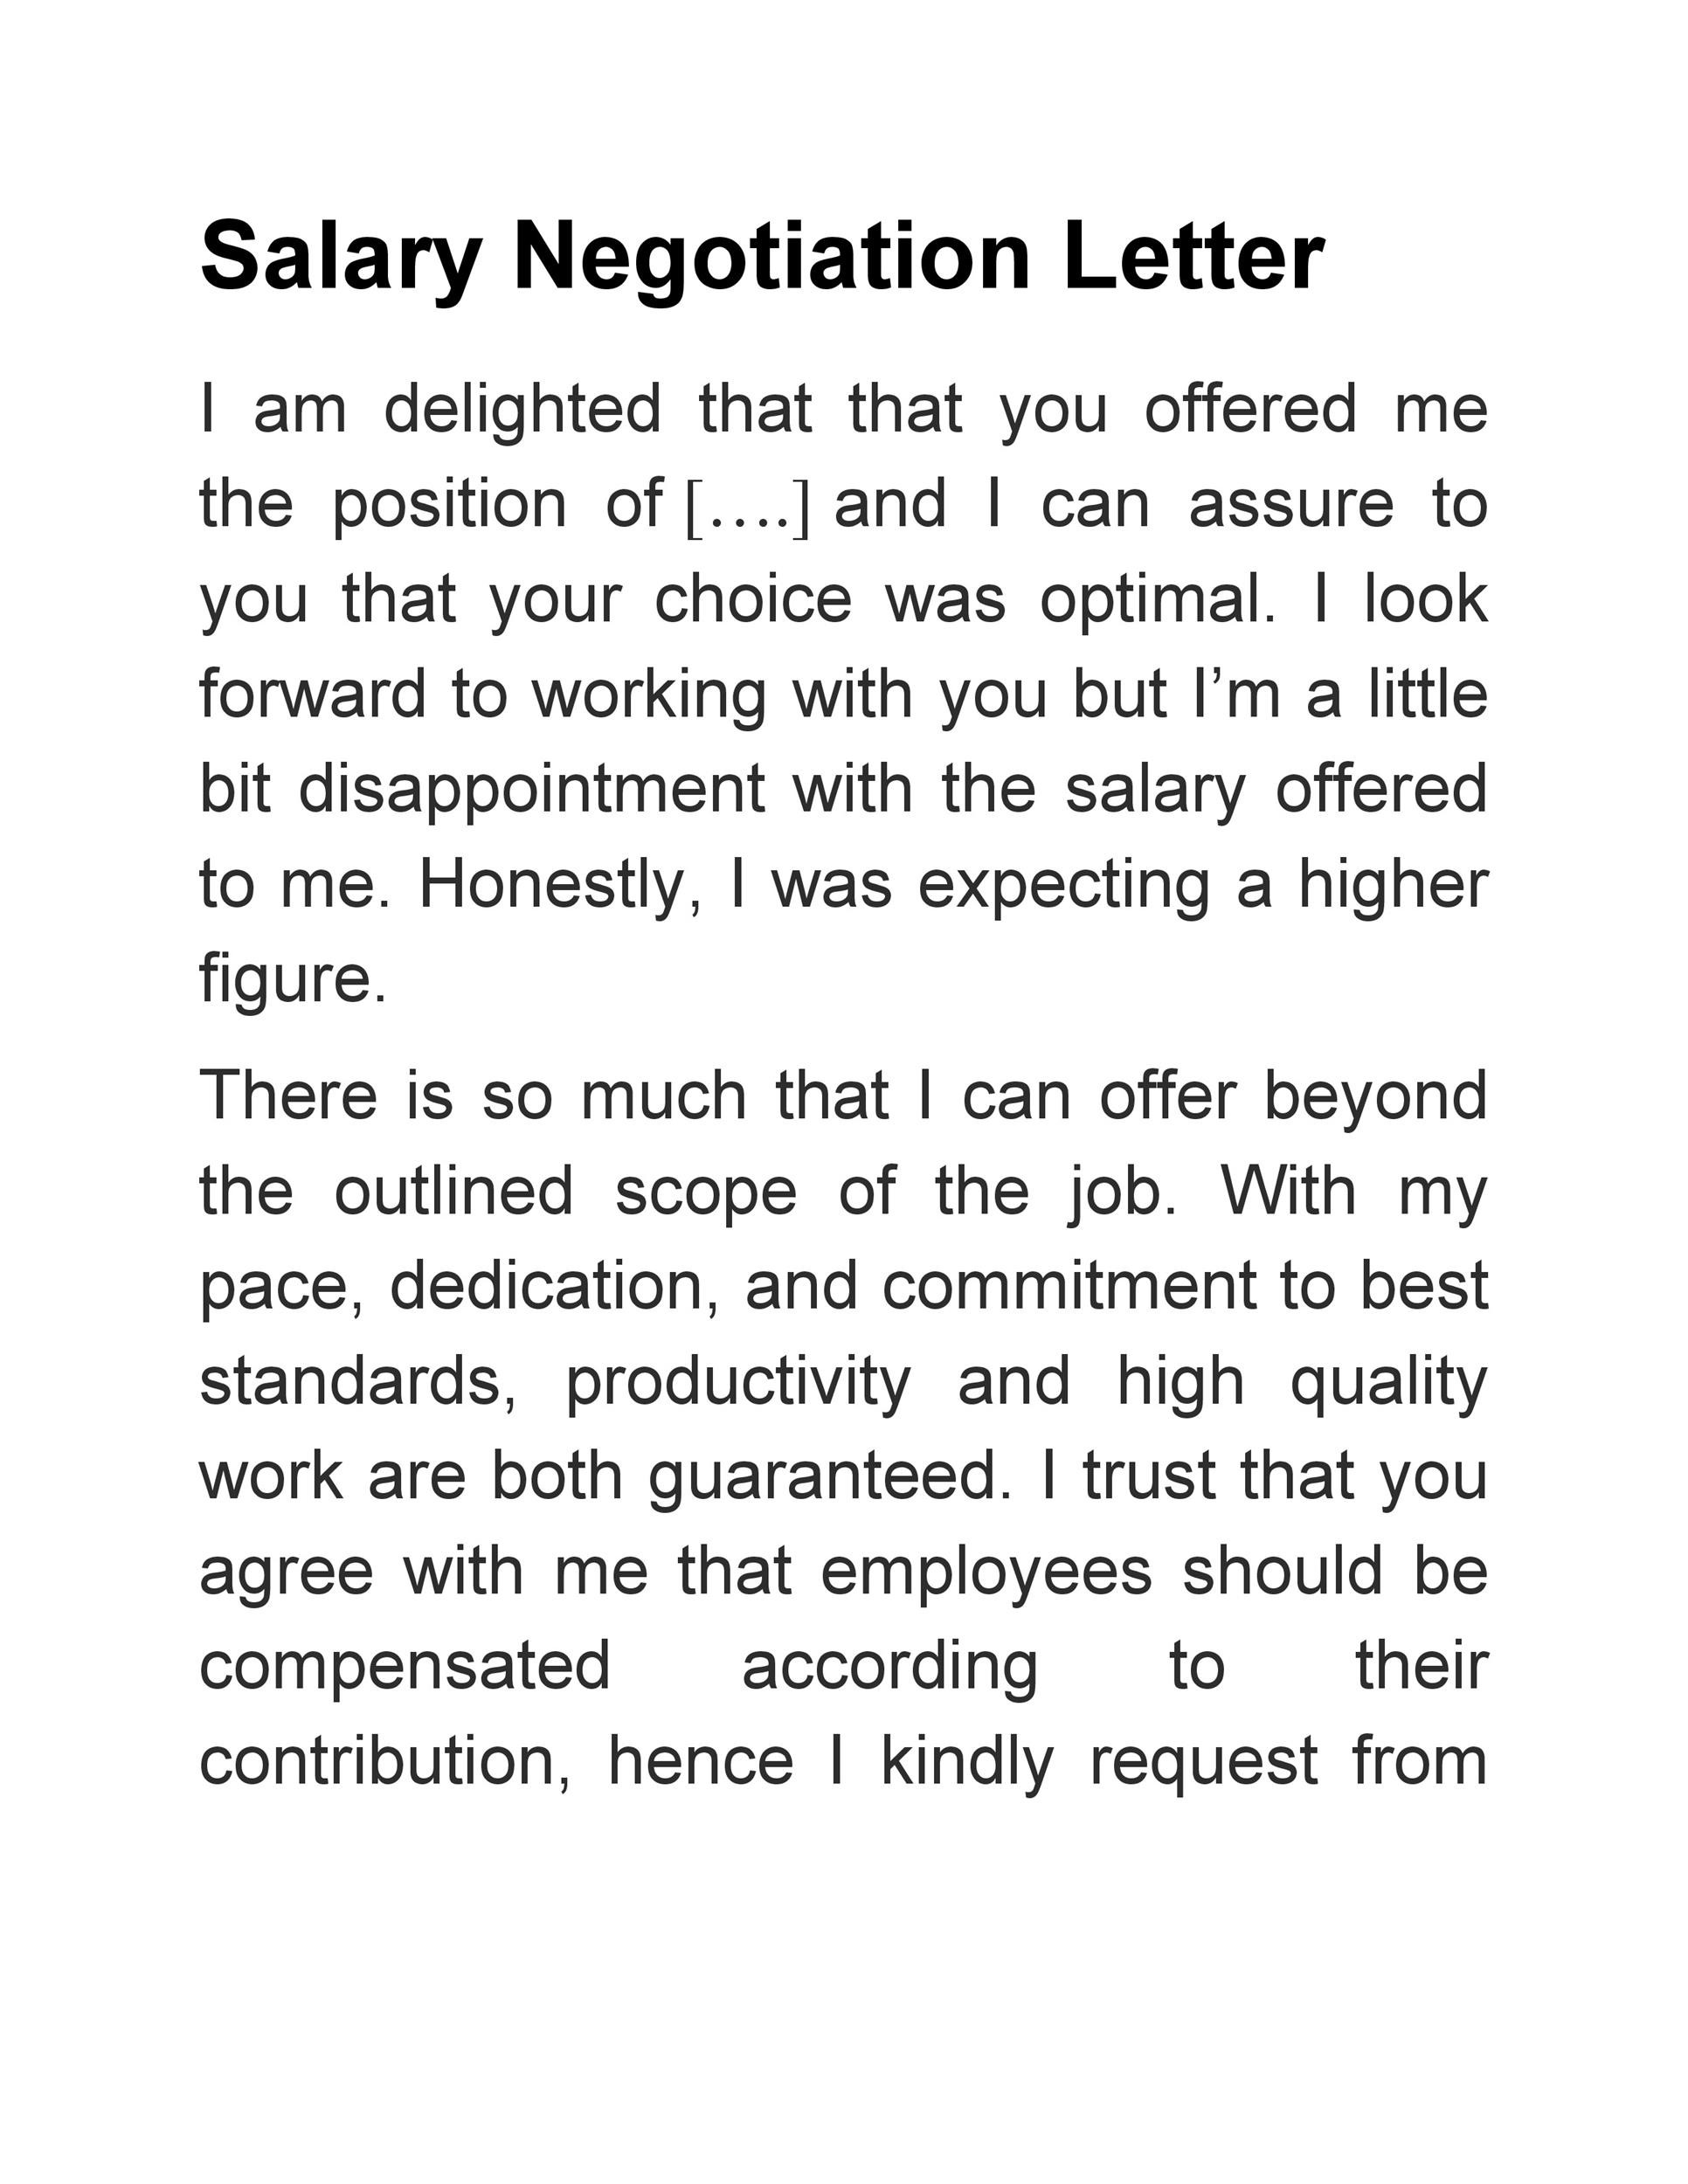 Free salary negotiation letter 21